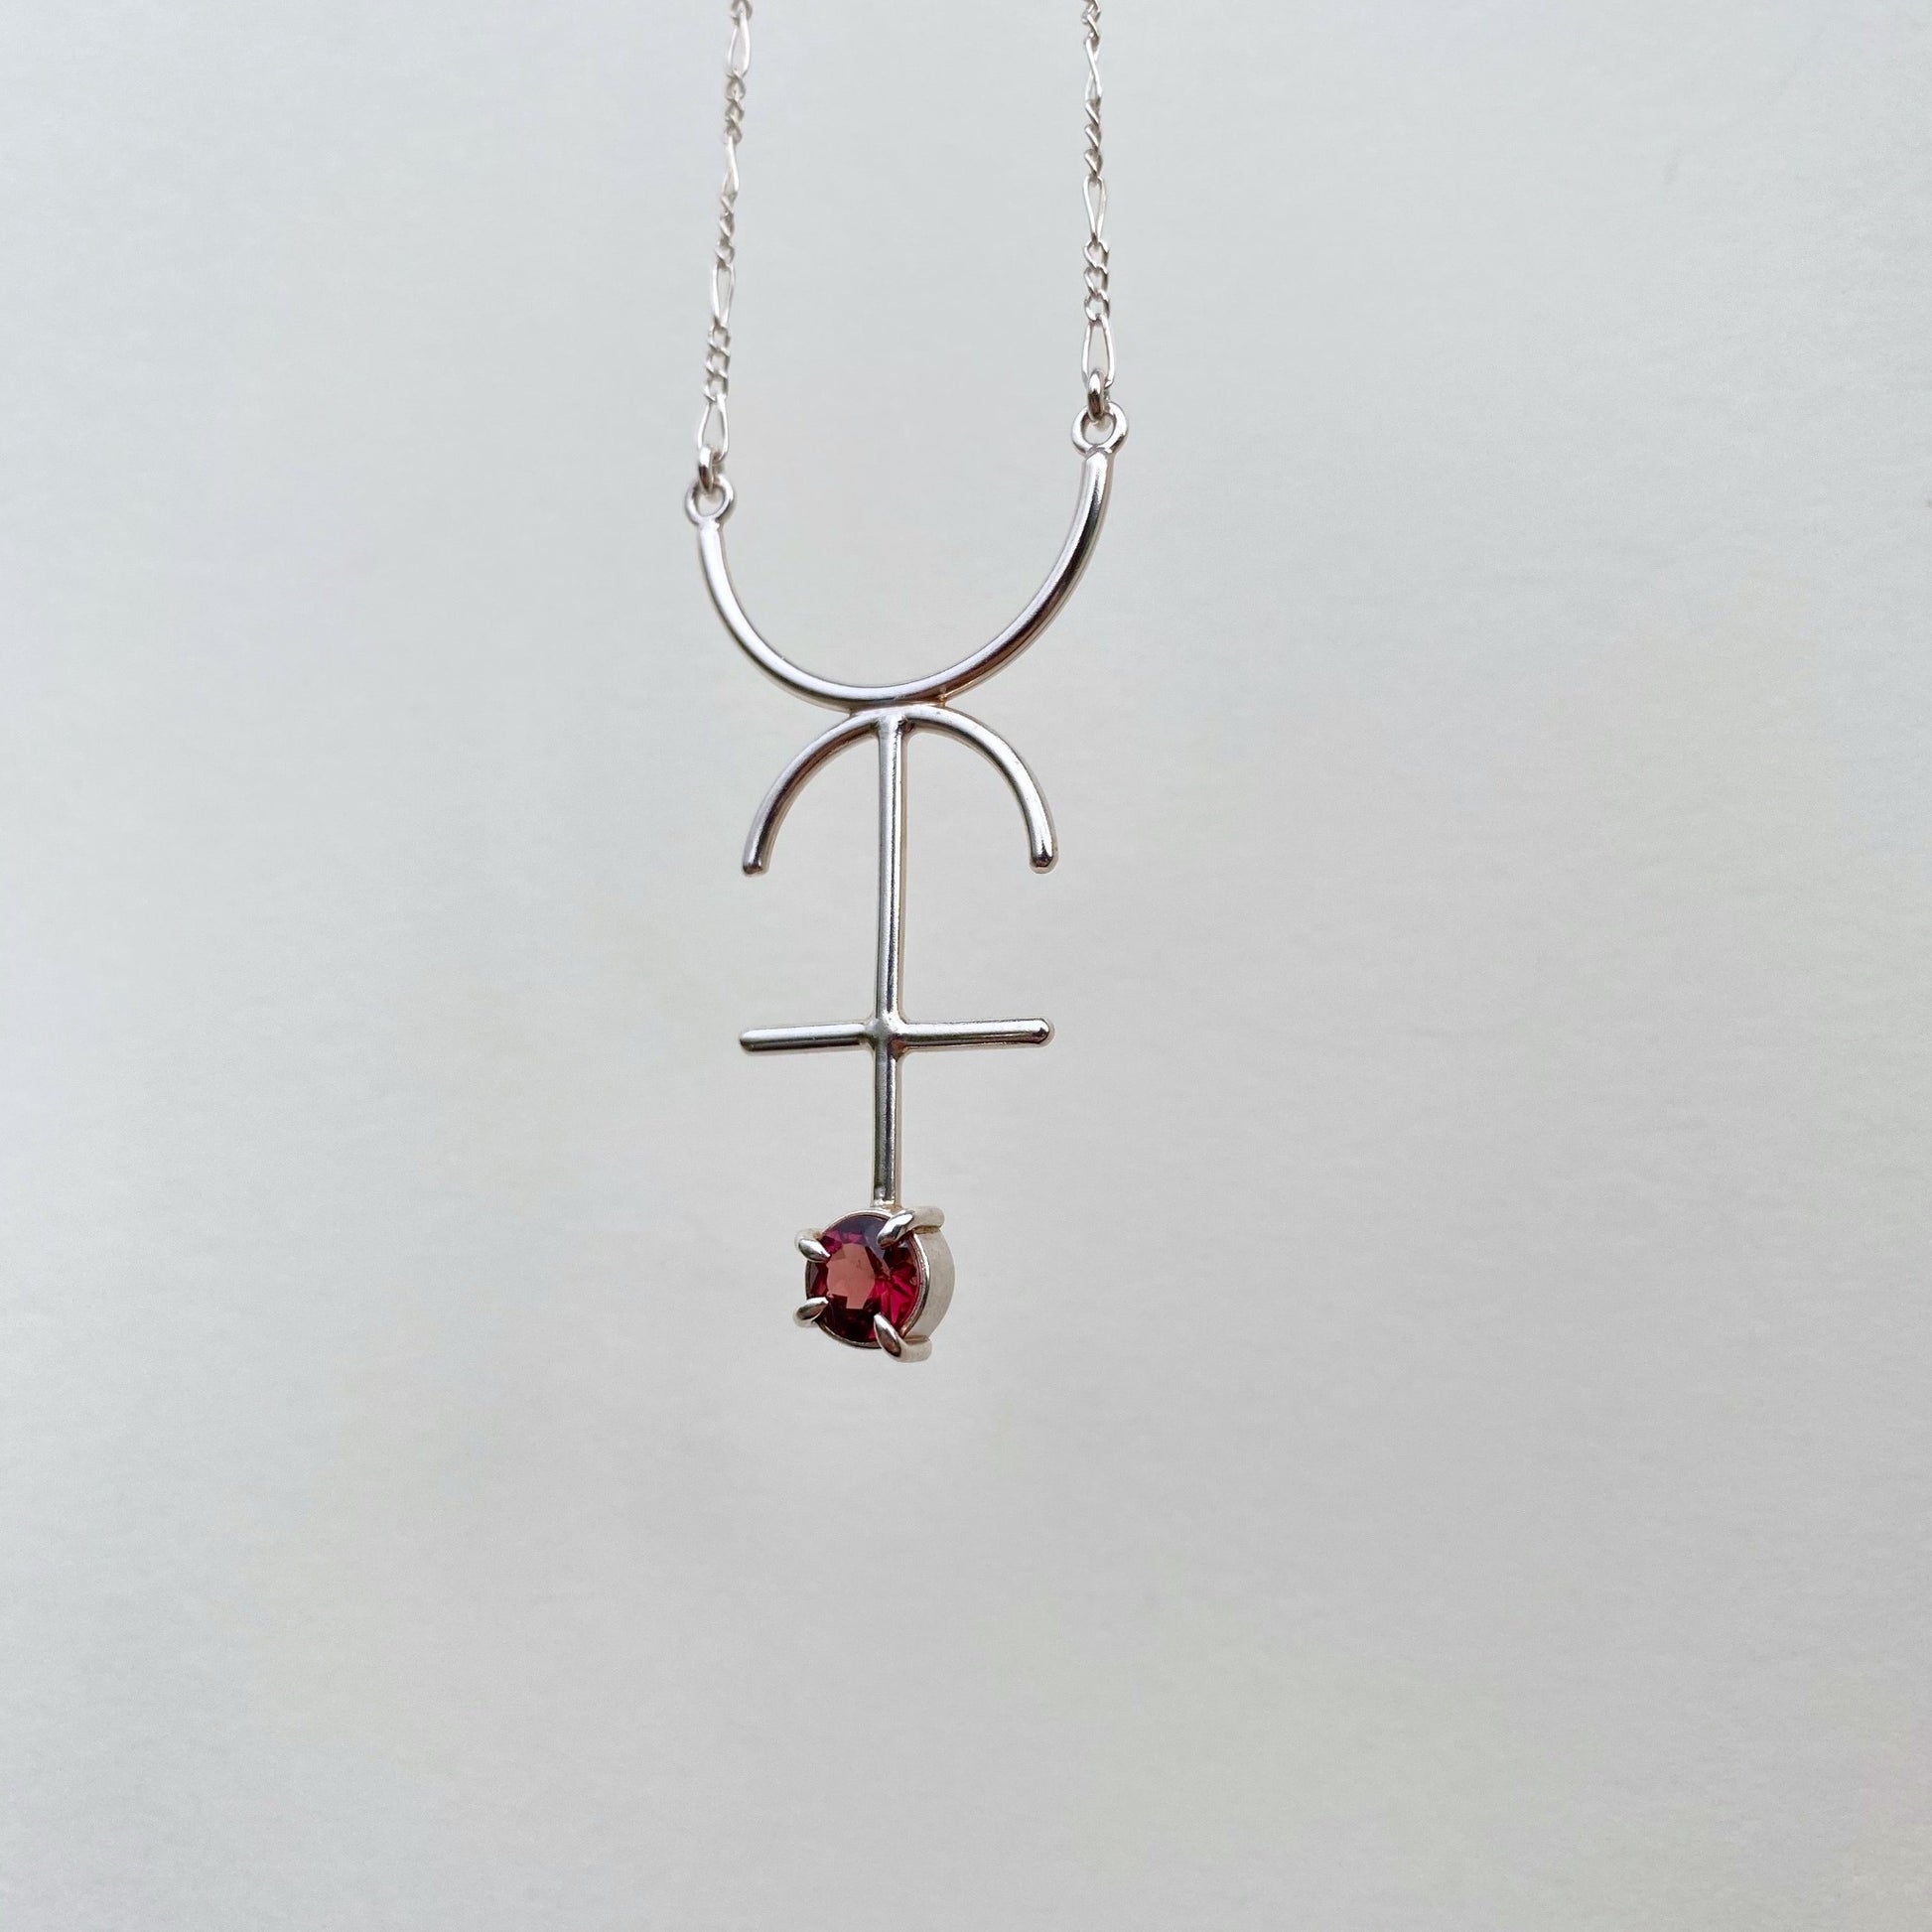 ASTROS SYMBOLS sterling silver and pink Tourmaline necklace II